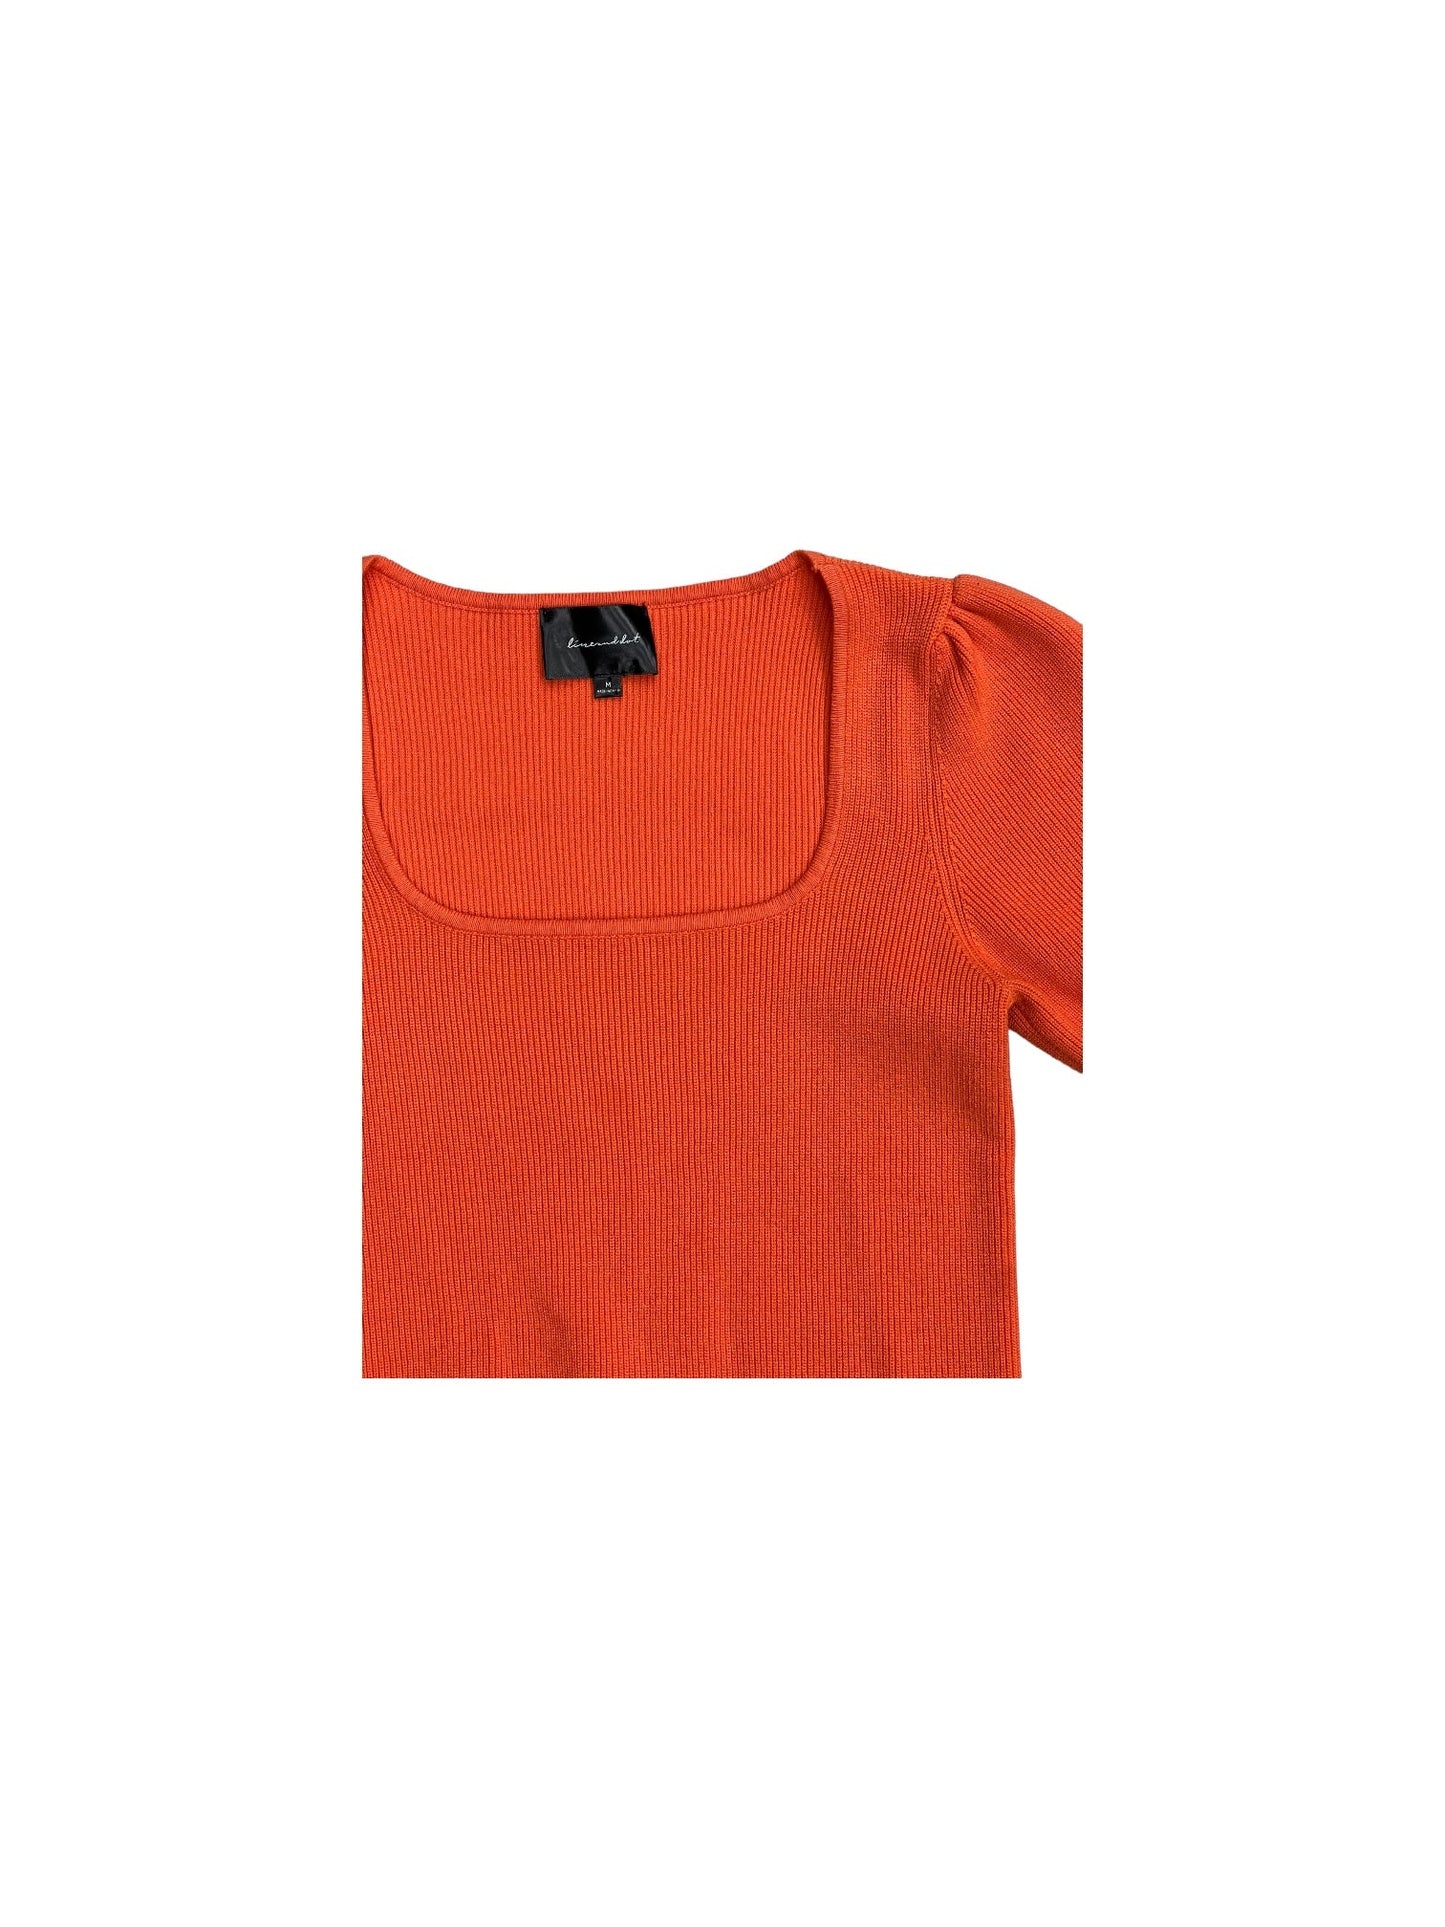 Top Short Sleeve By Line & Dot  Size: M